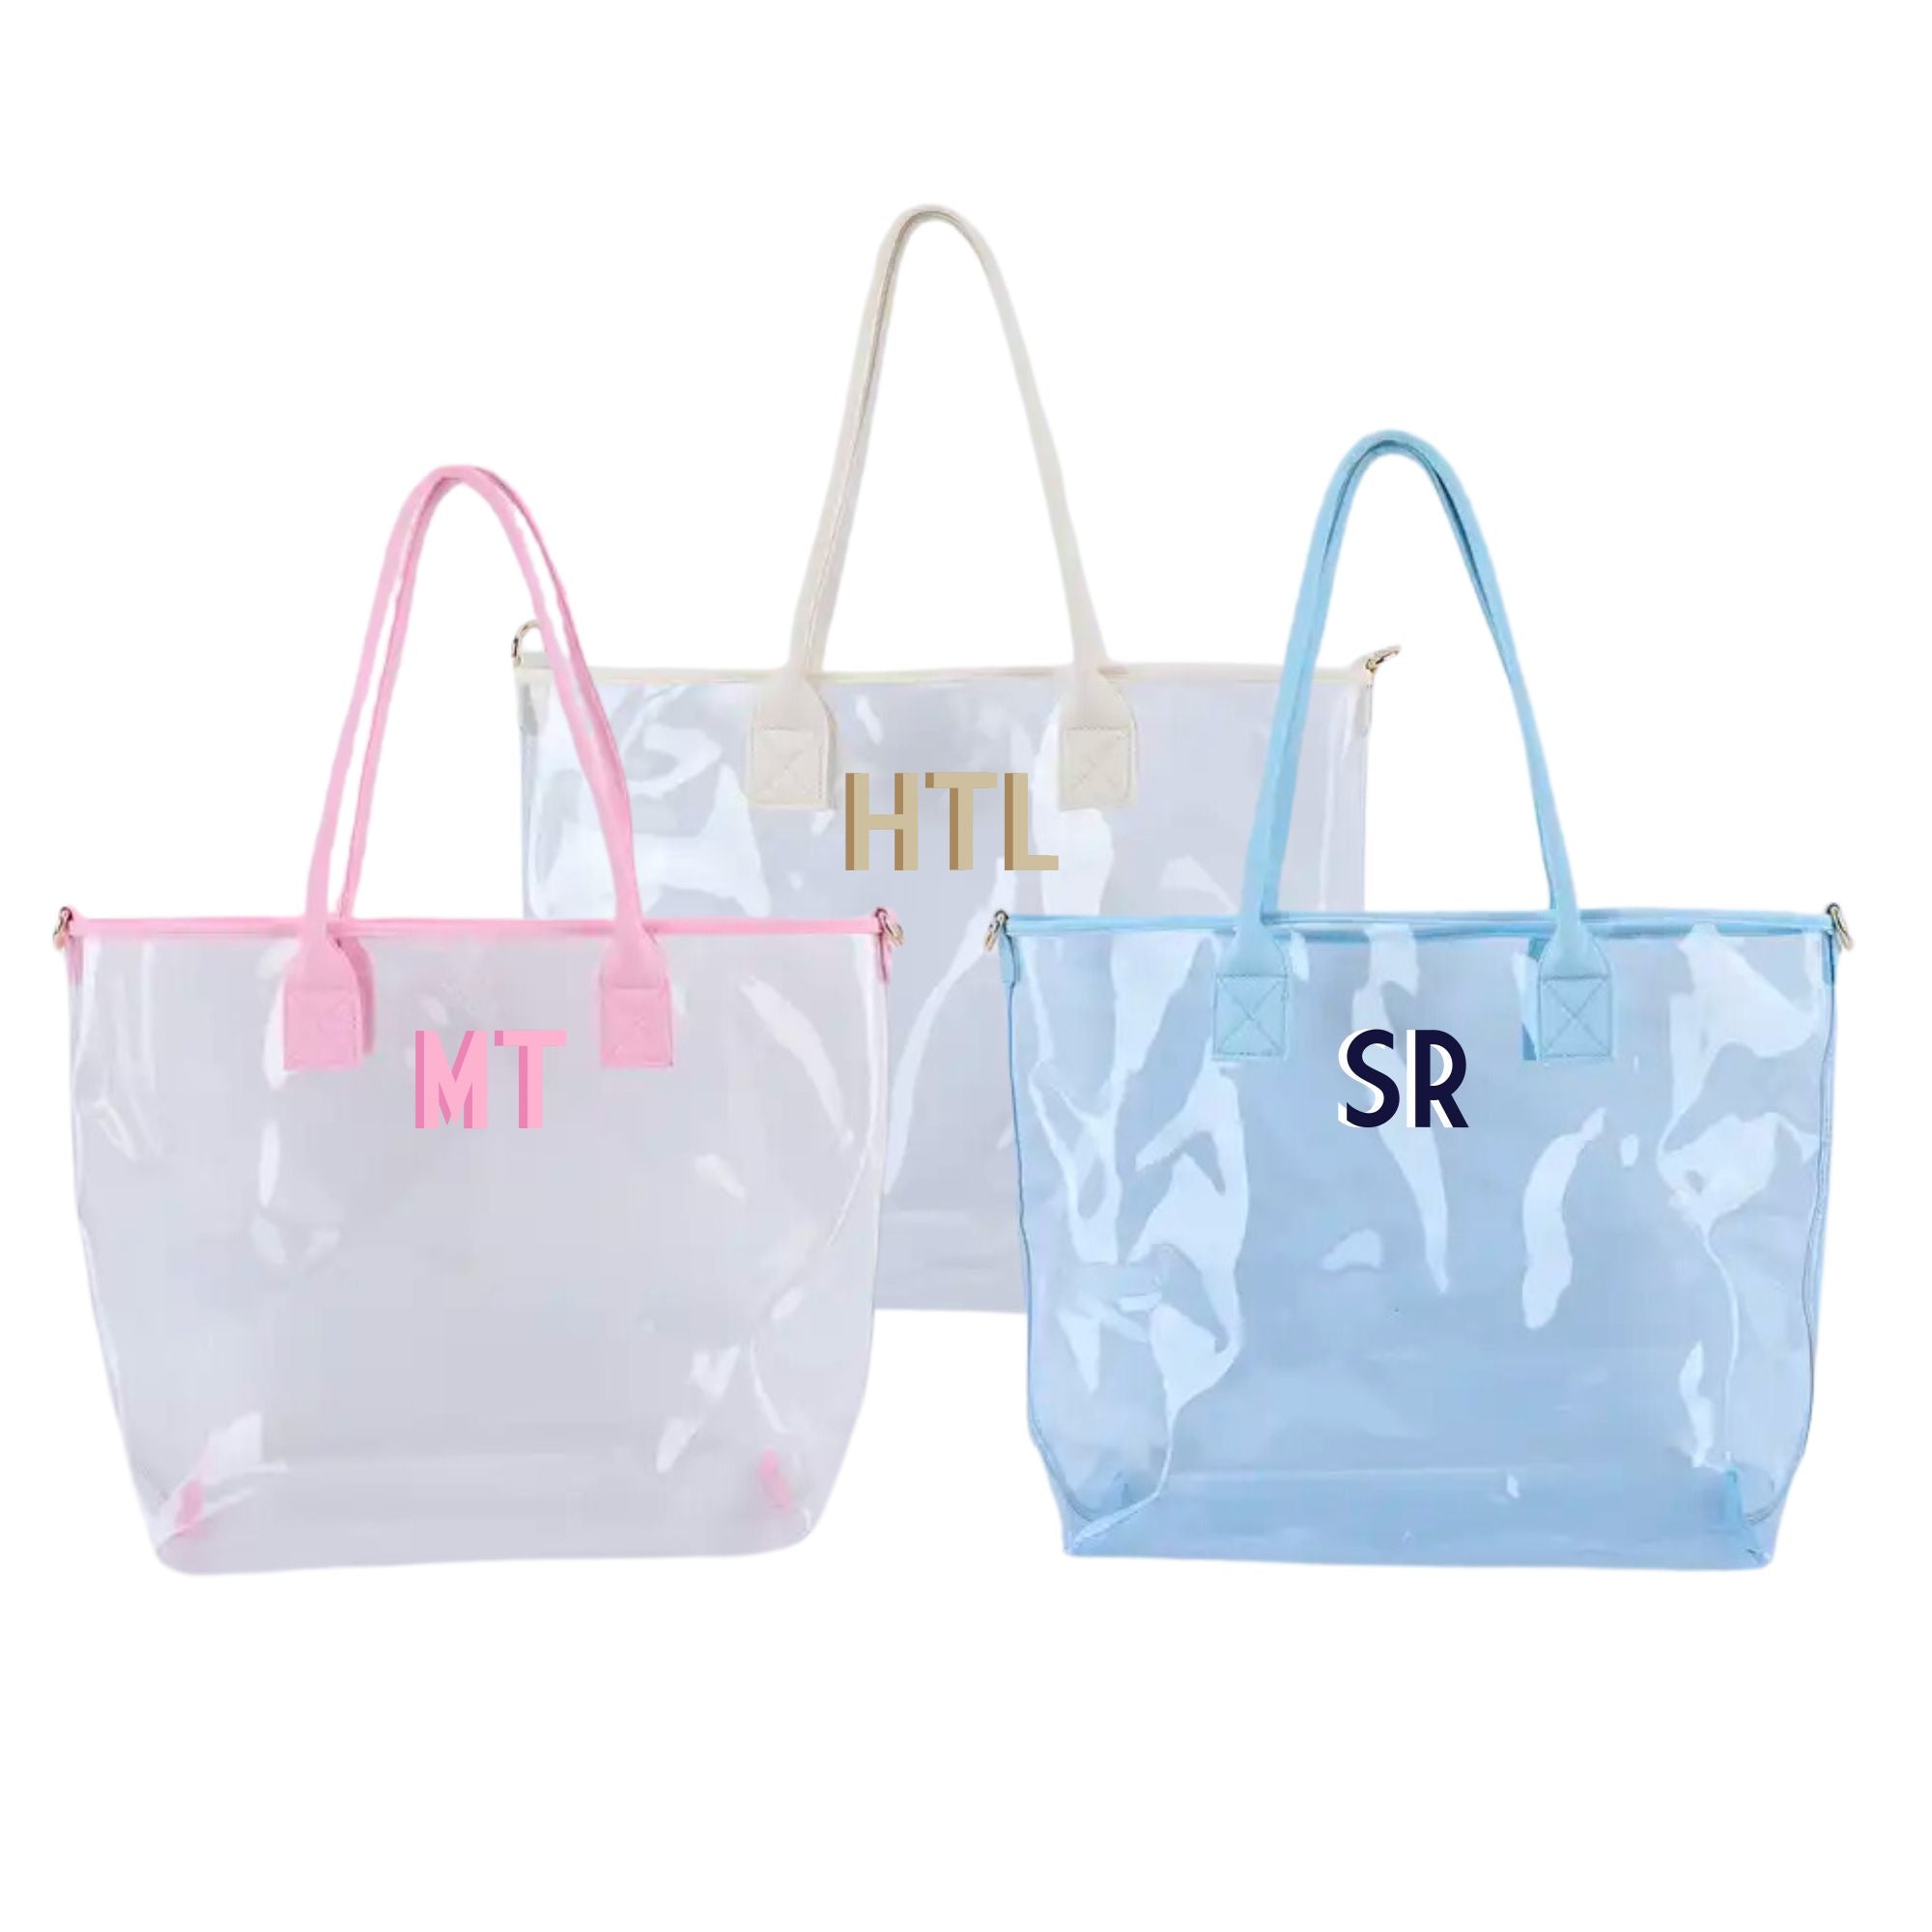 A cream, pink, and a blue clear tote are personalized with different colored monograms.